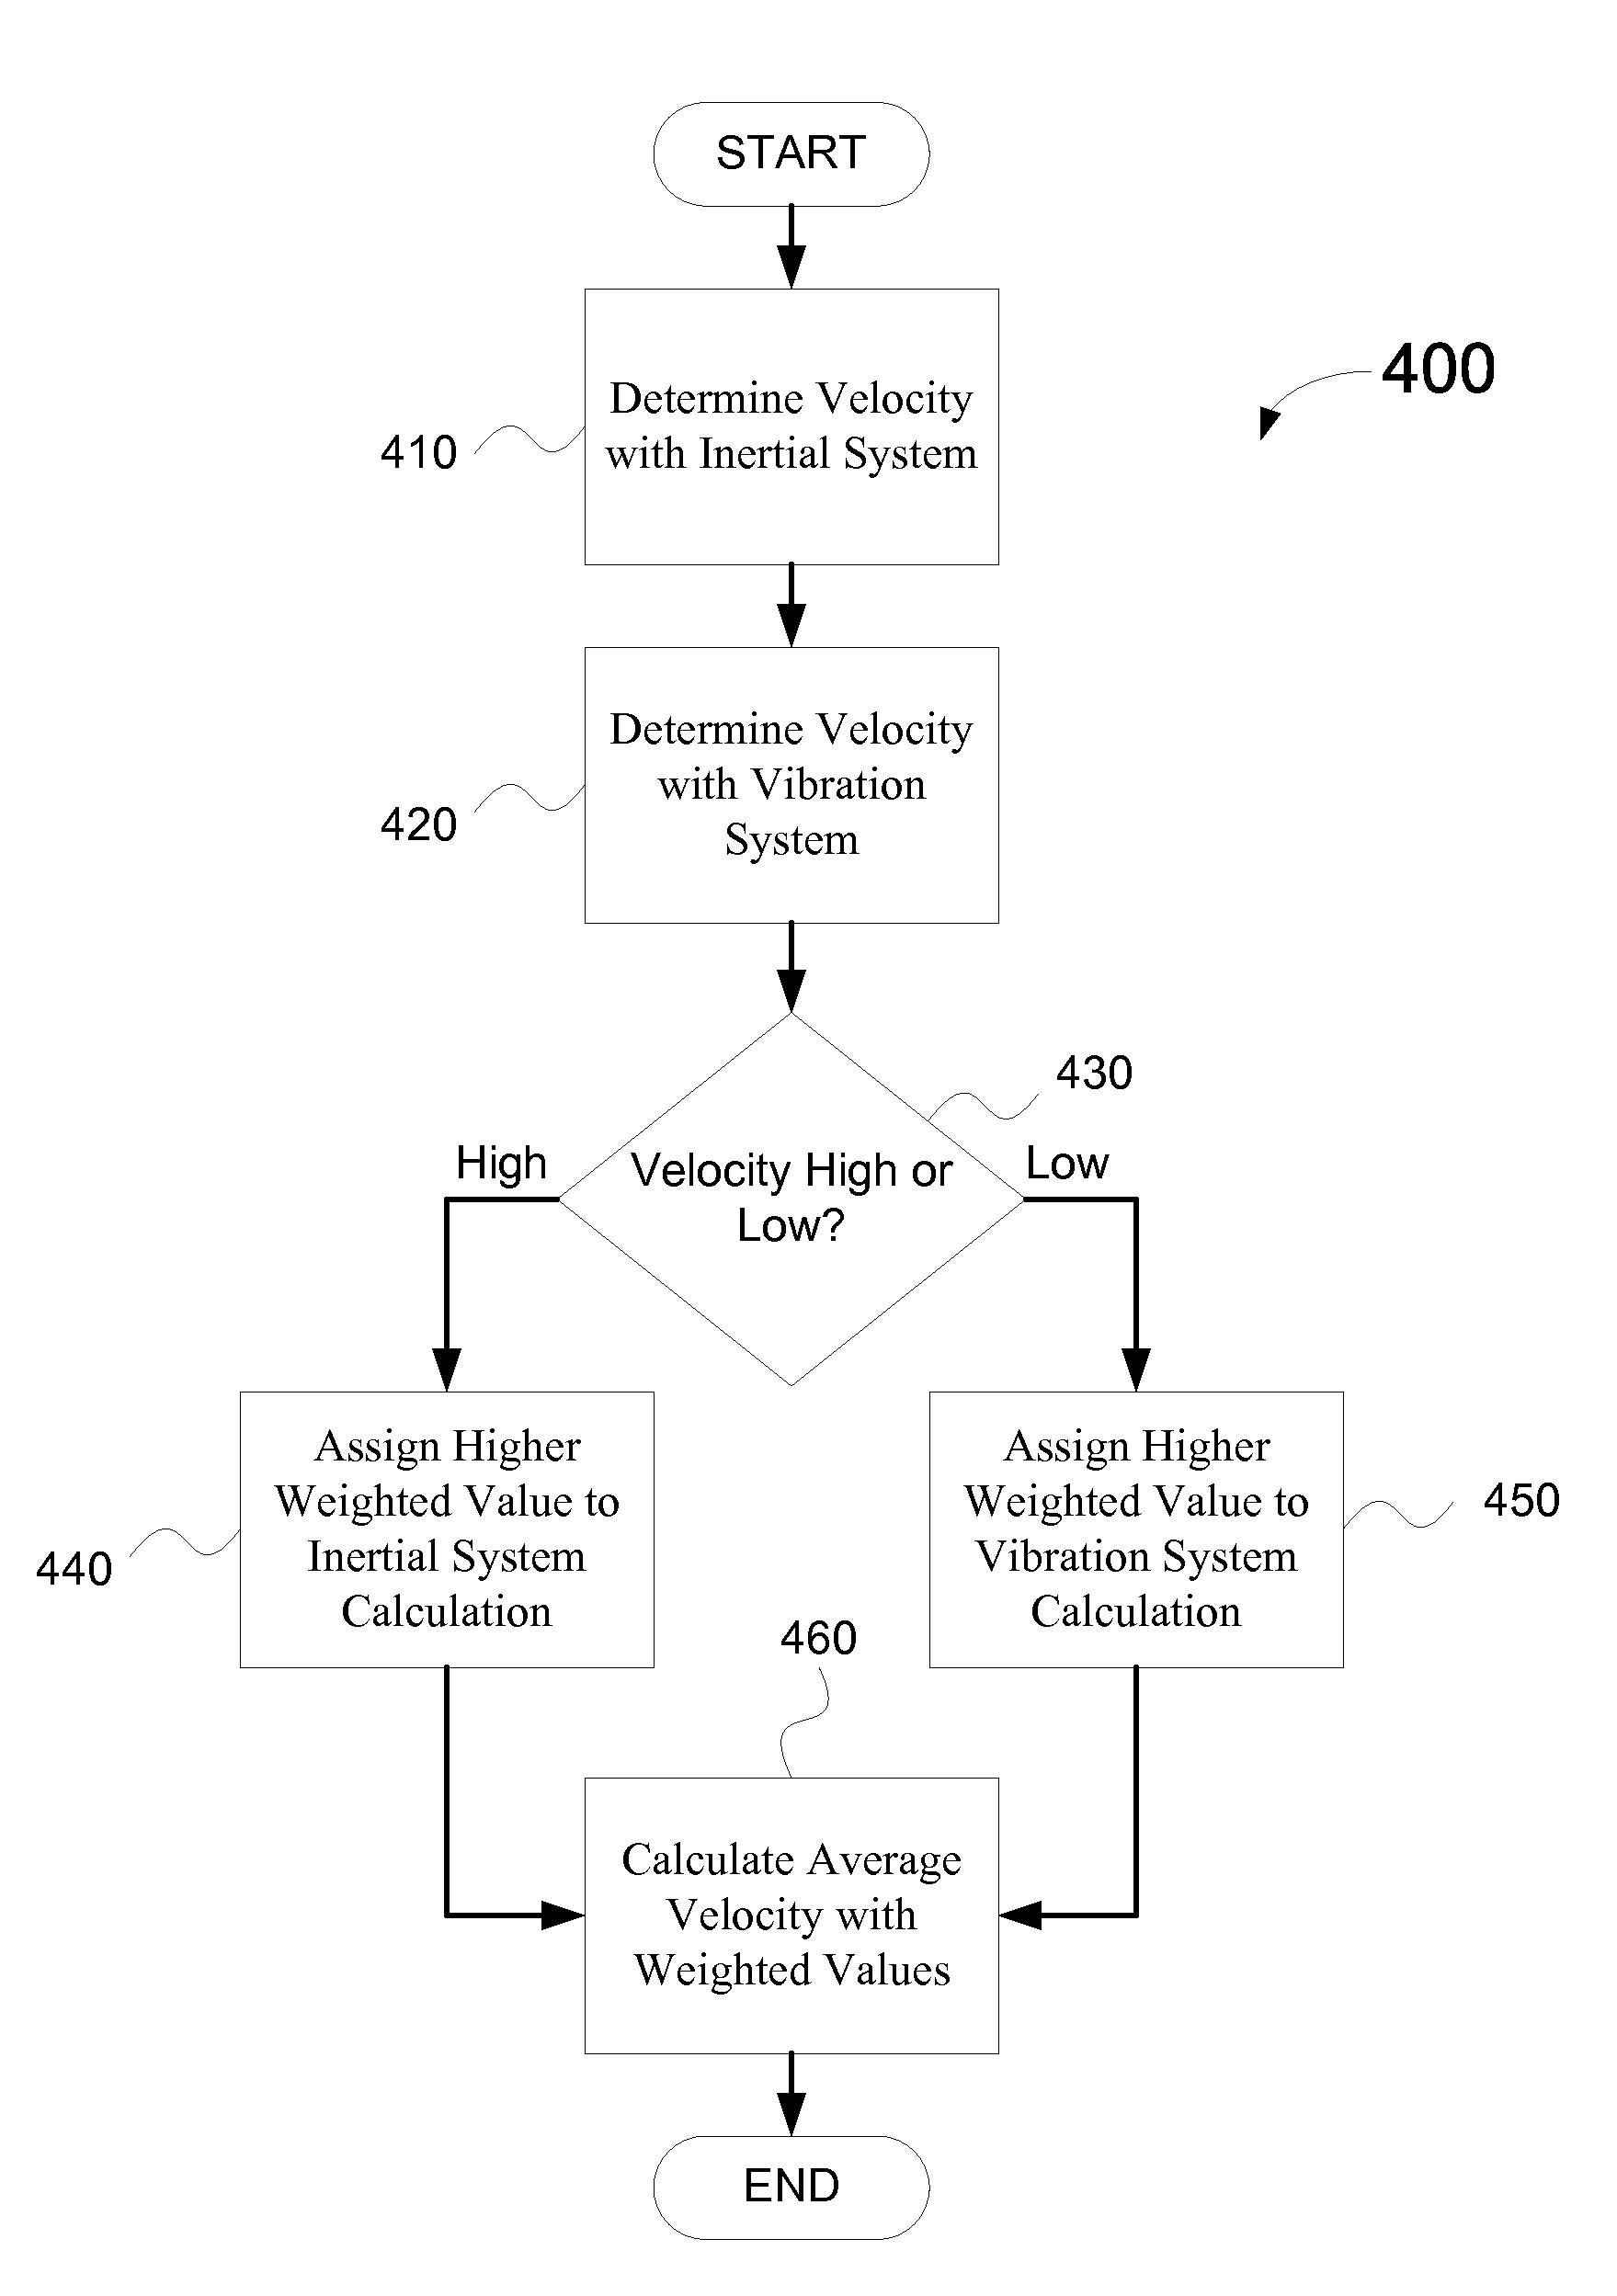 Control device with an accelerometer system